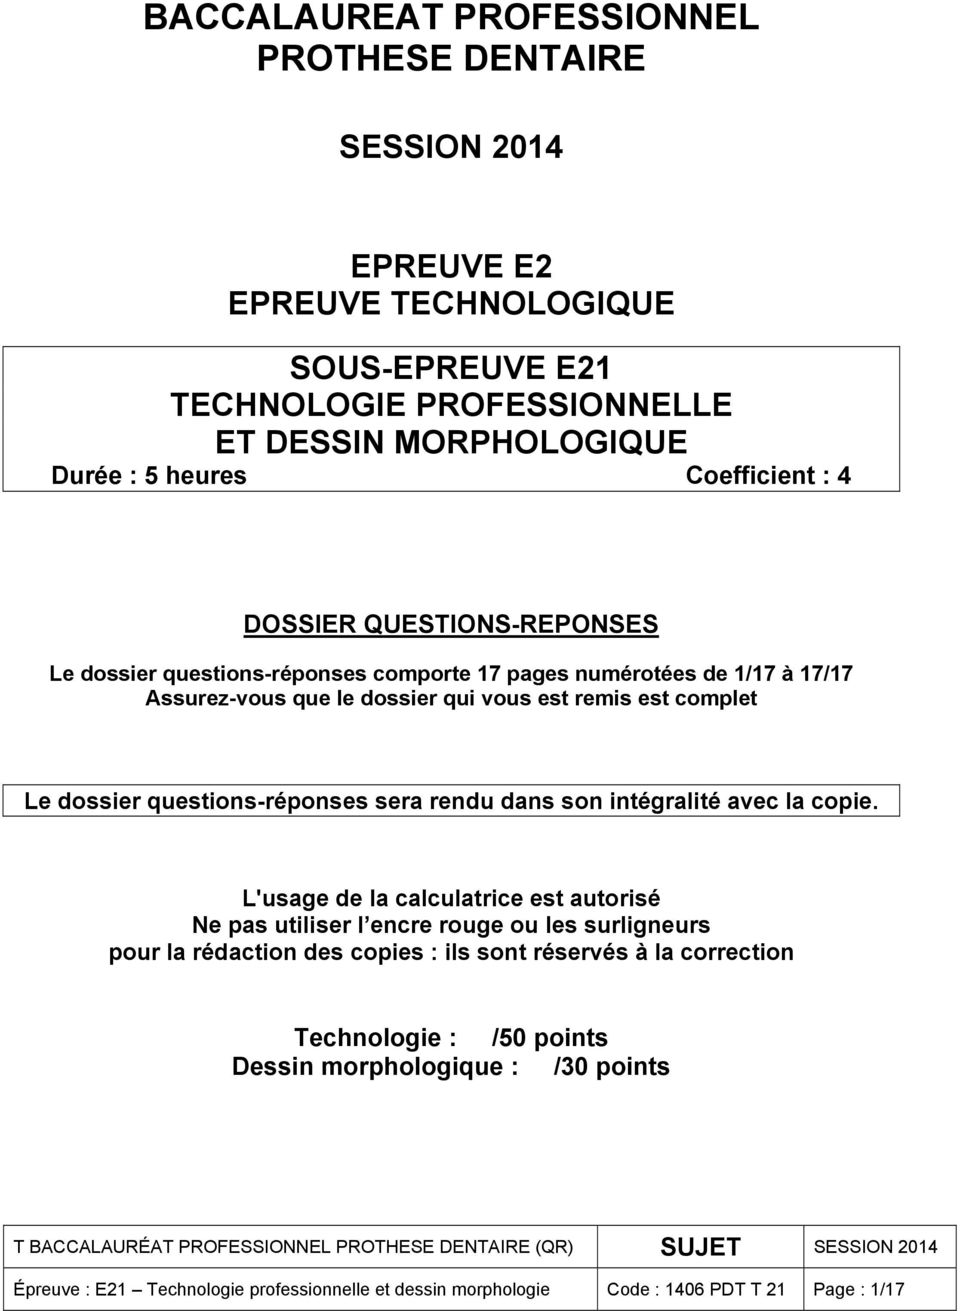 BACCALAUREAT PROFESSIONNEL PROTHESE DENTAIRE - PDF Free Download